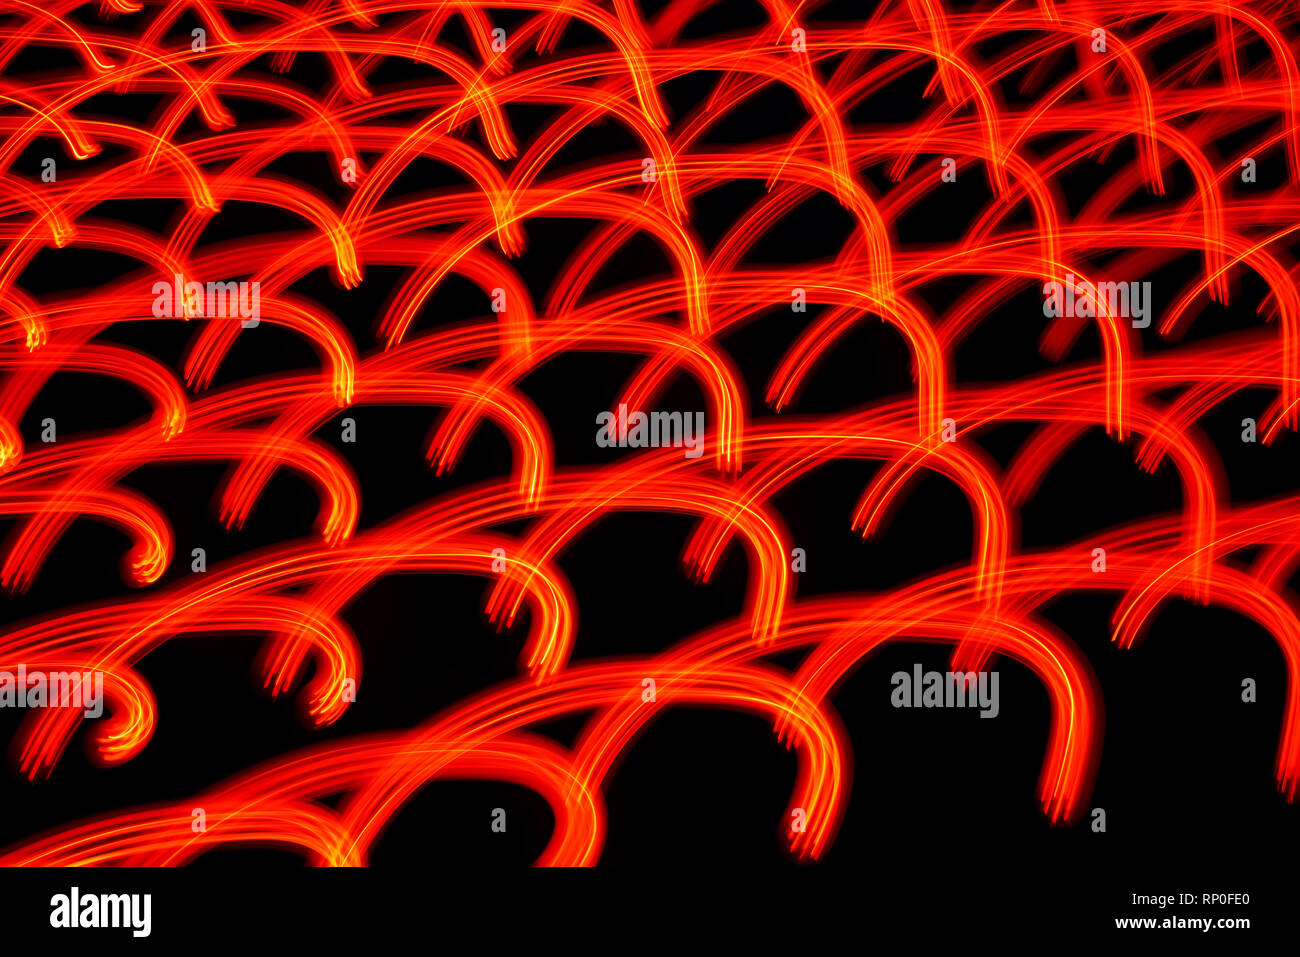 Long exposure photo of moving colorful neon light patterns Stock Photo